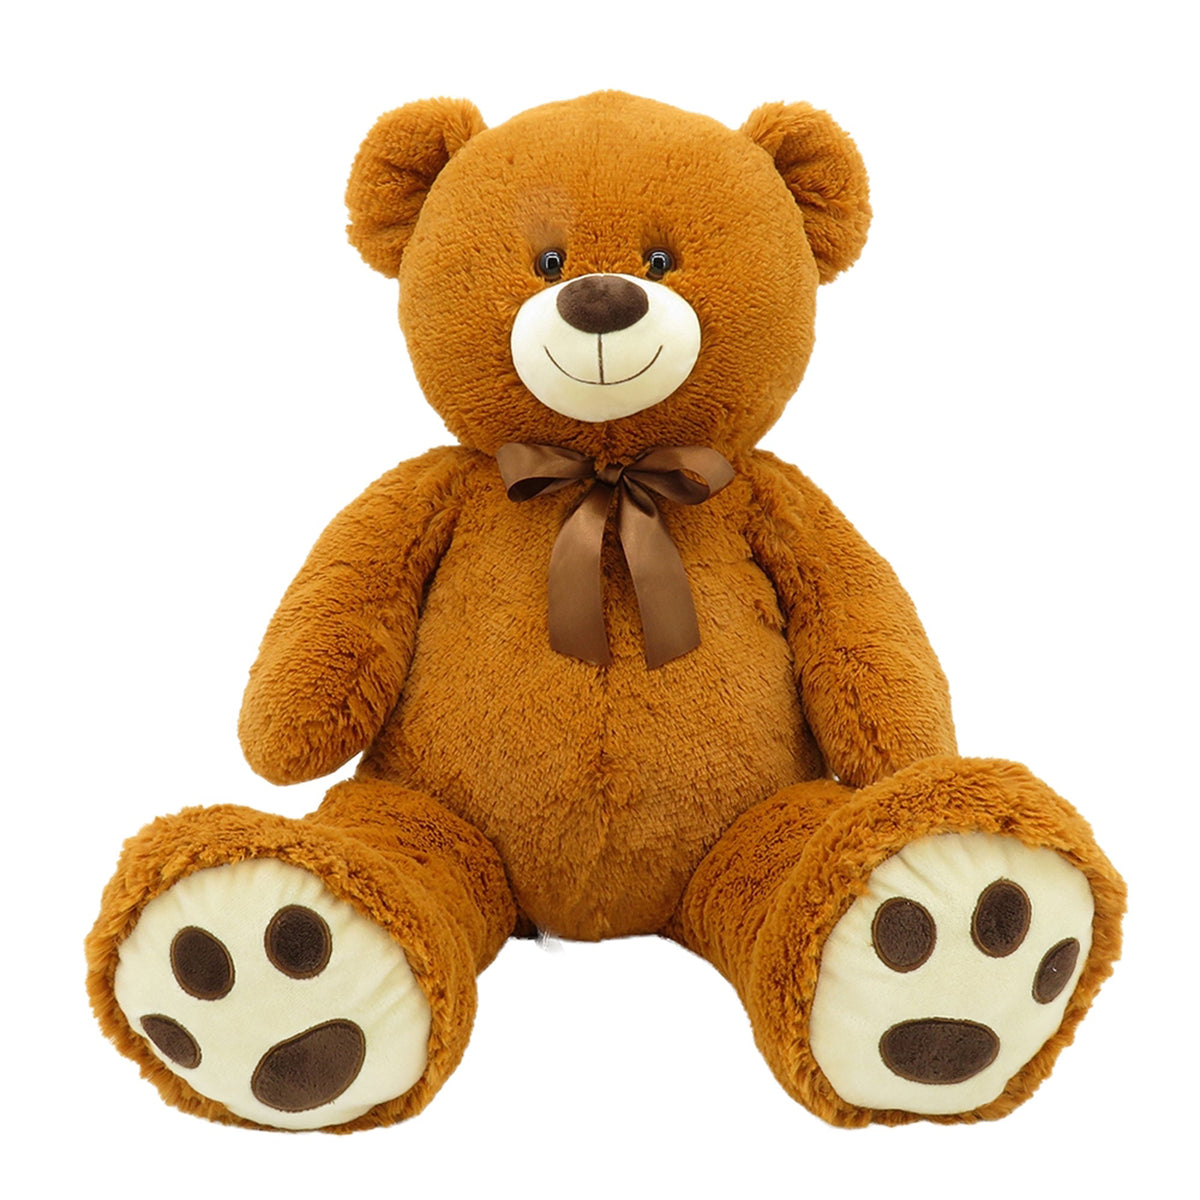 LINZY TOYS INC. Plushes Teddy Bear Plush, Brown, 36 Inches, 1 Count 619470702163